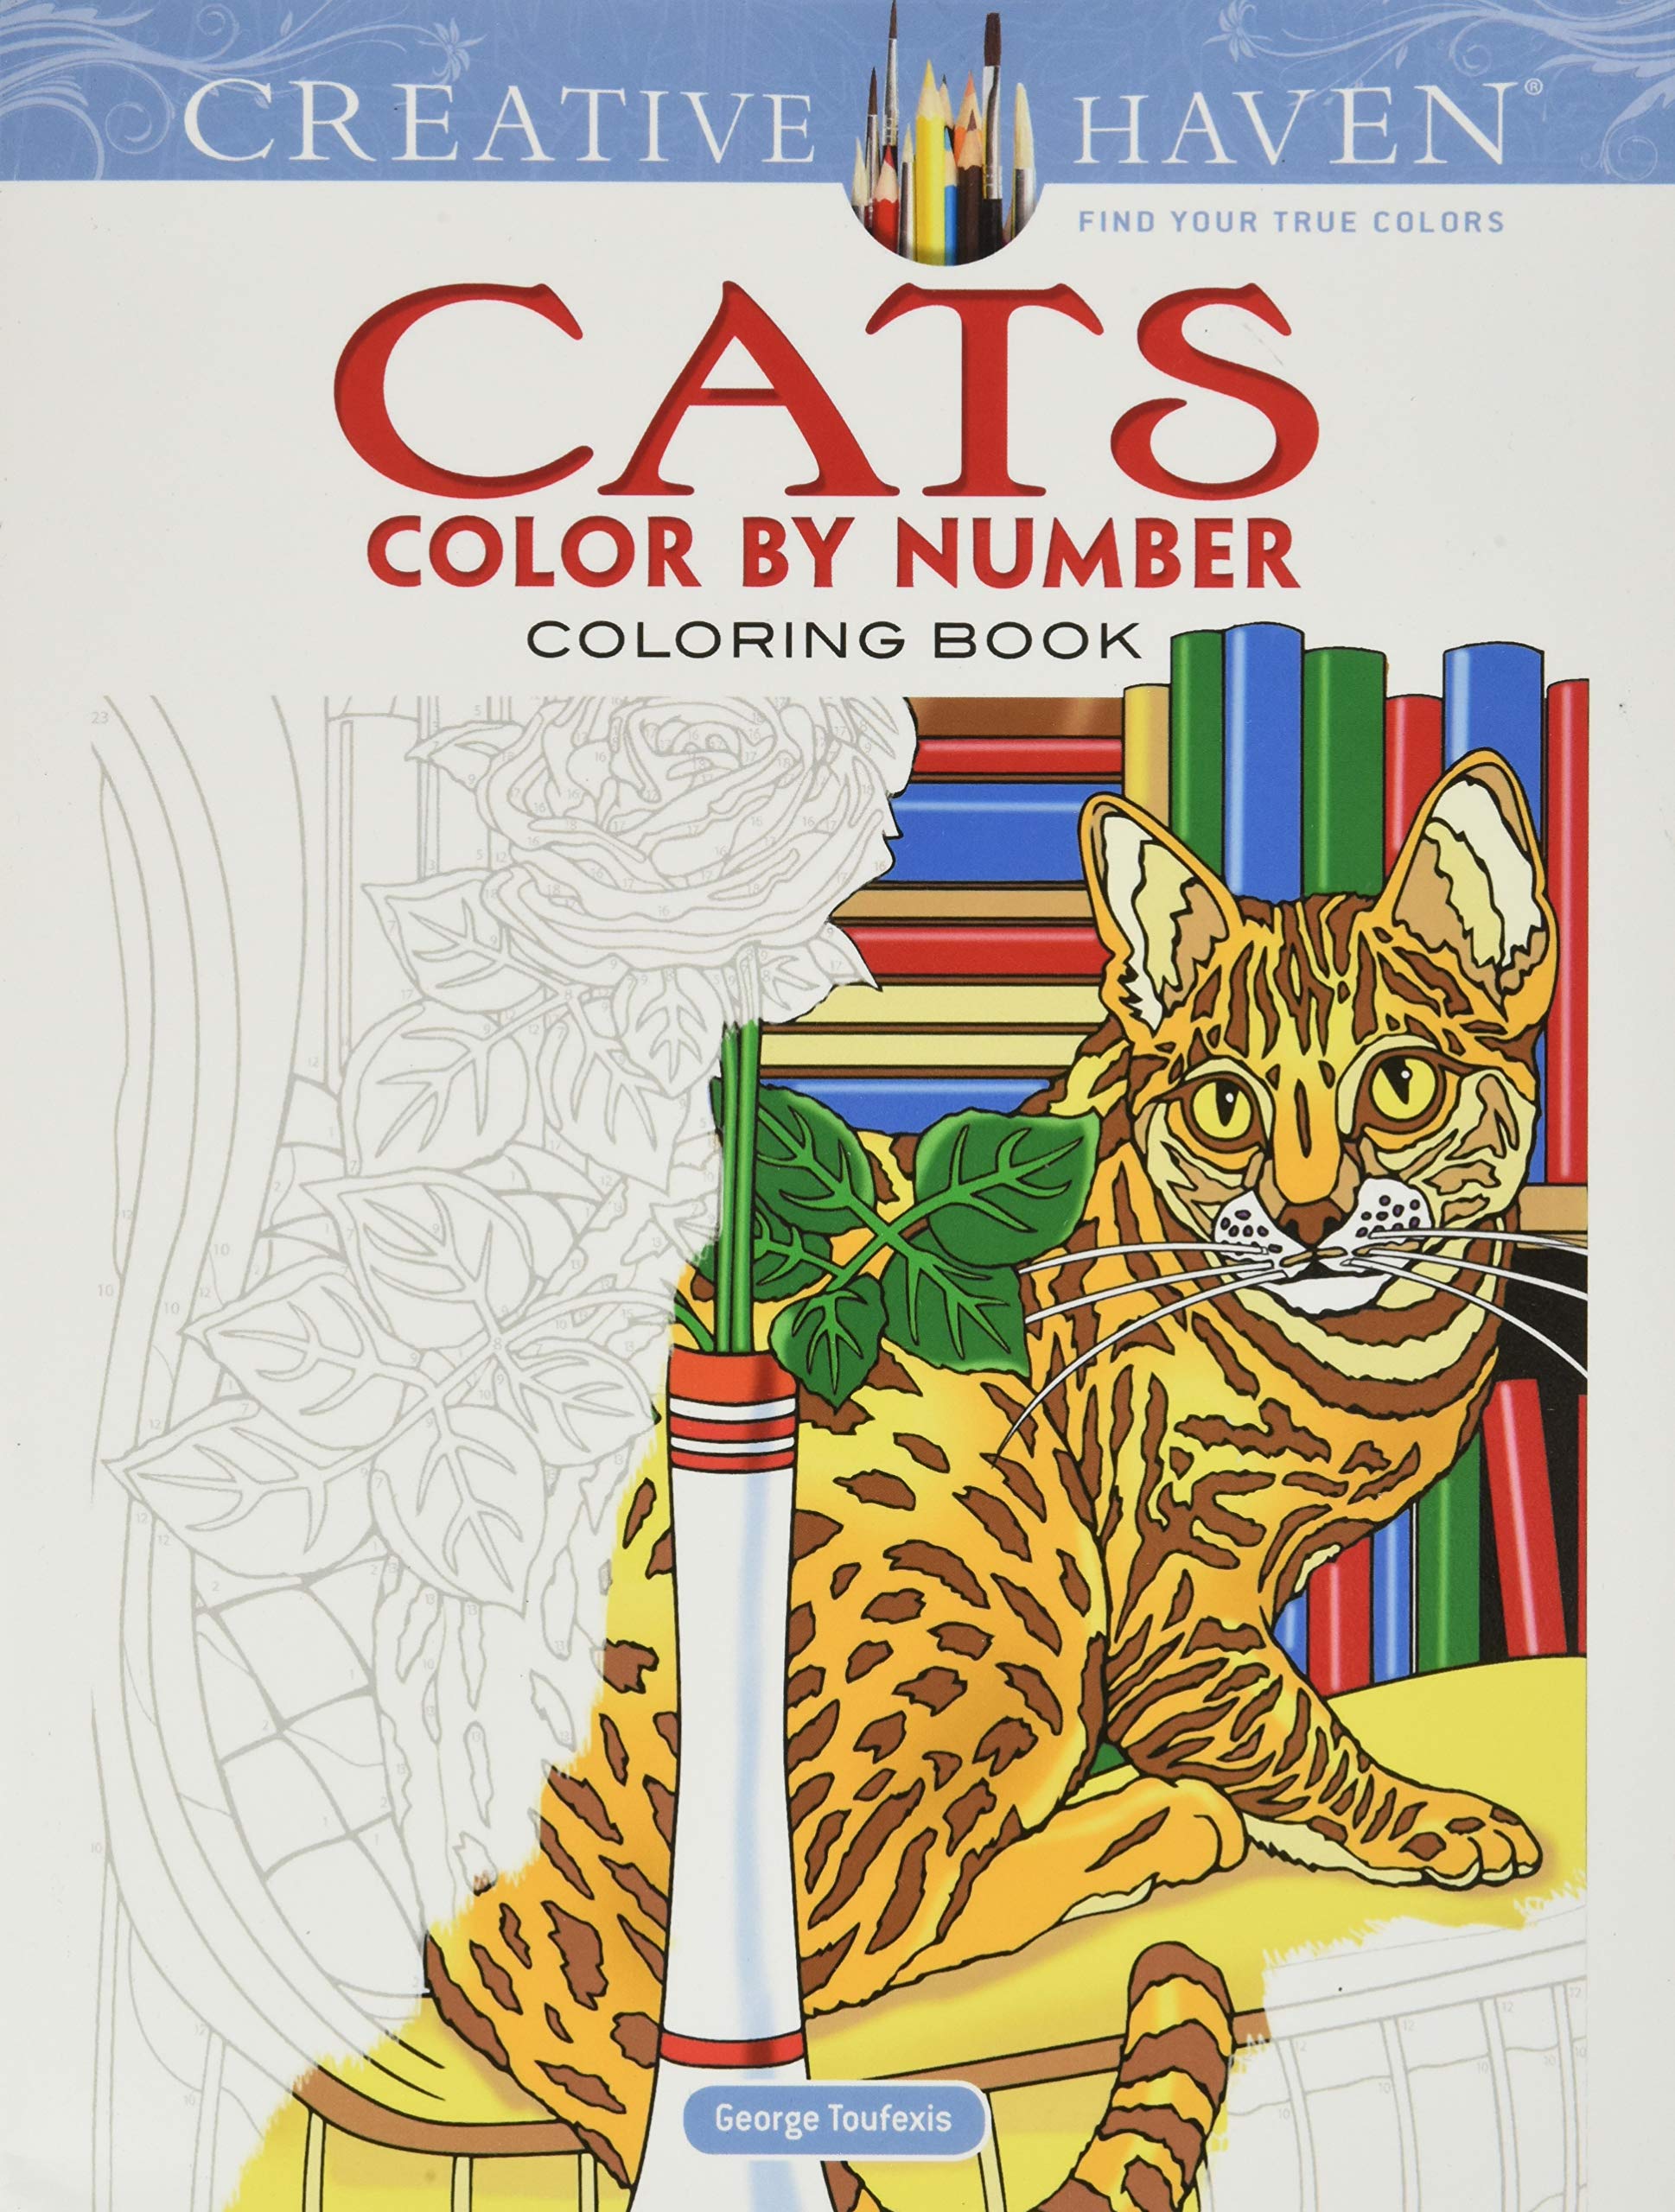 Cats Color by Number Coloring Book